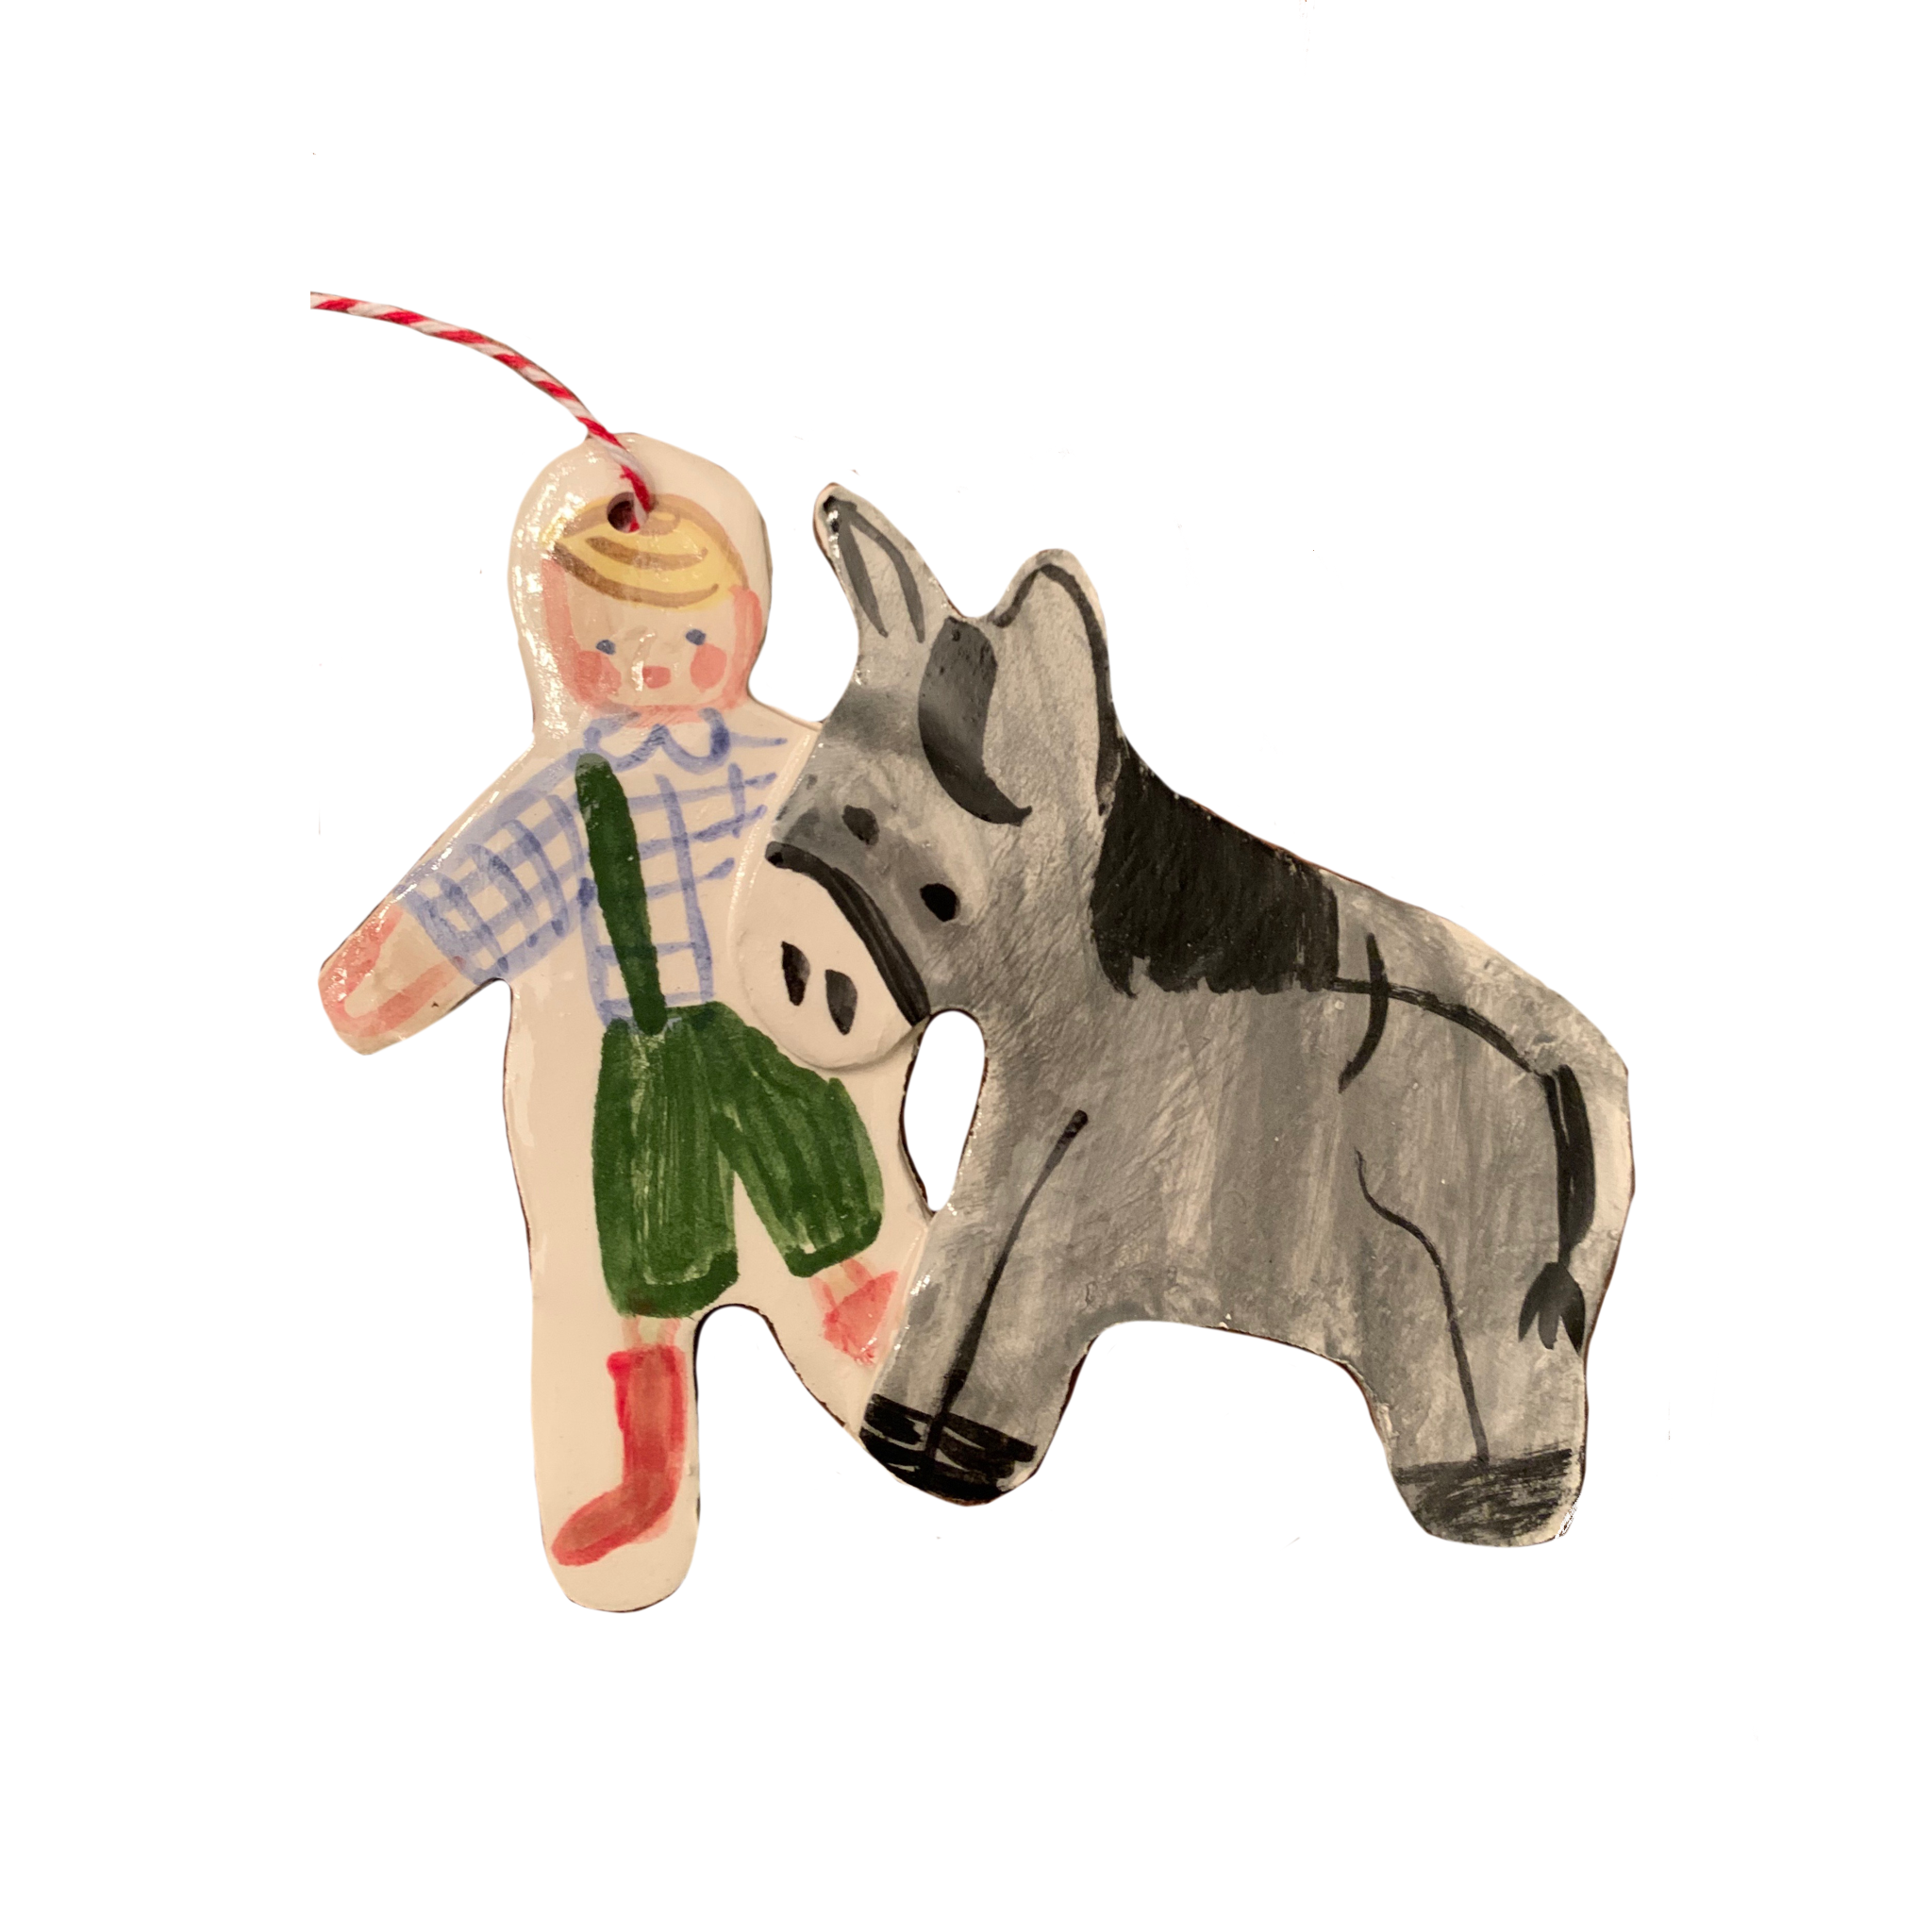 Donkey and Boy Ornament - Tricia Lowenfield Design